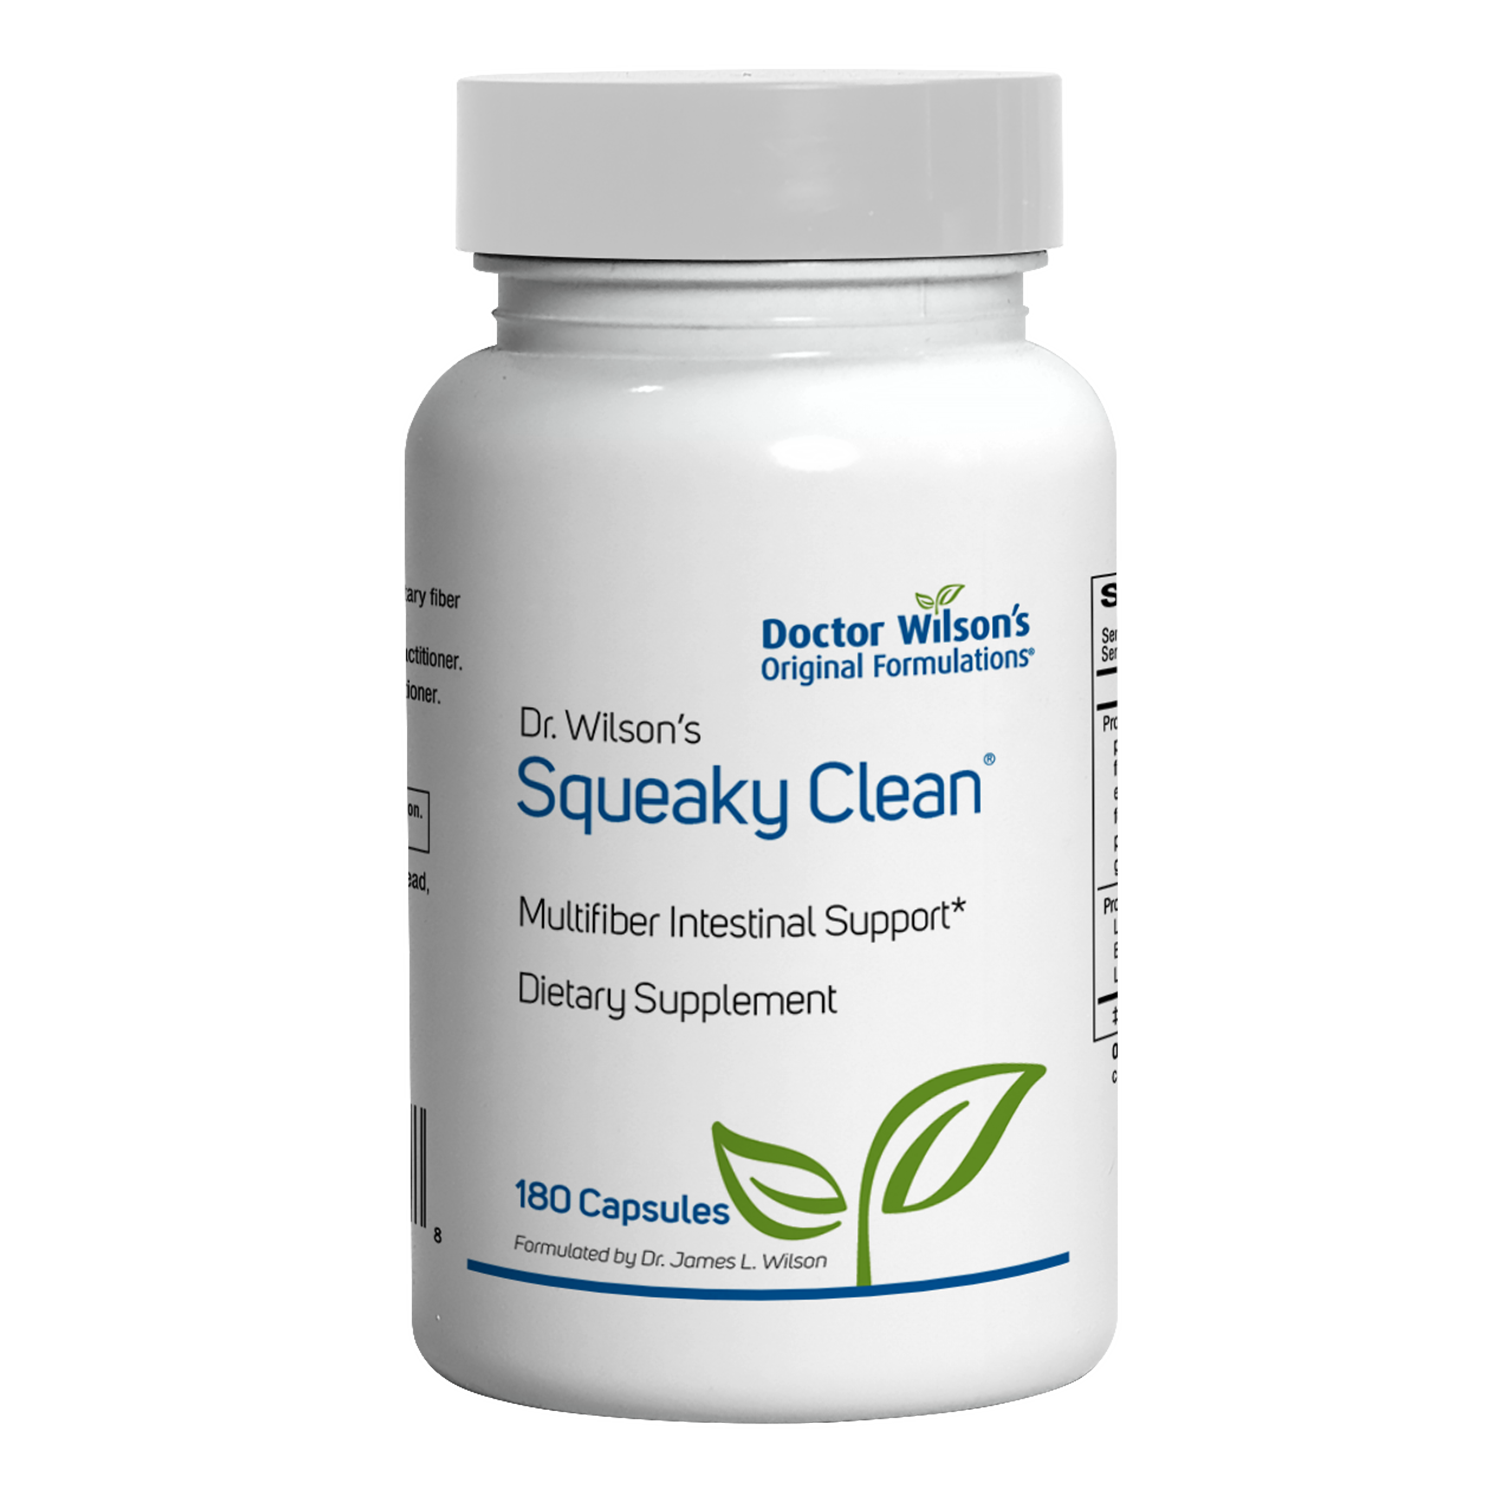 Dr. Wilson's Squeaky Clean 180 capsules